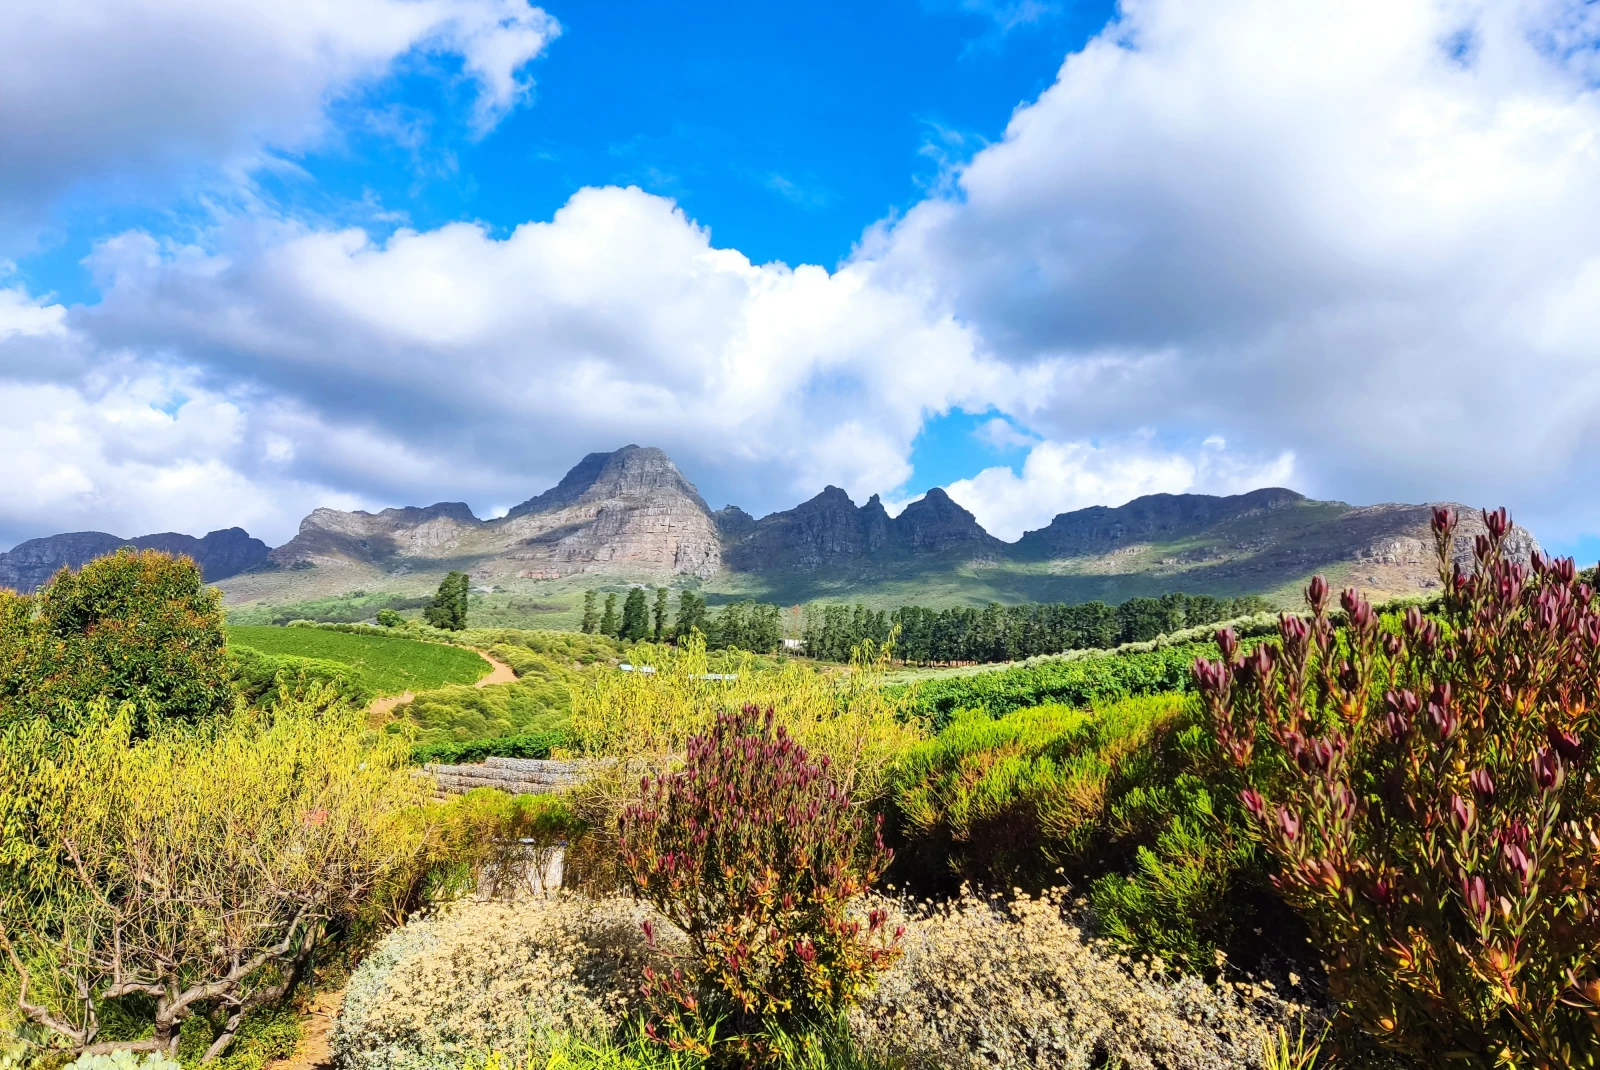 Winelands in South Africa